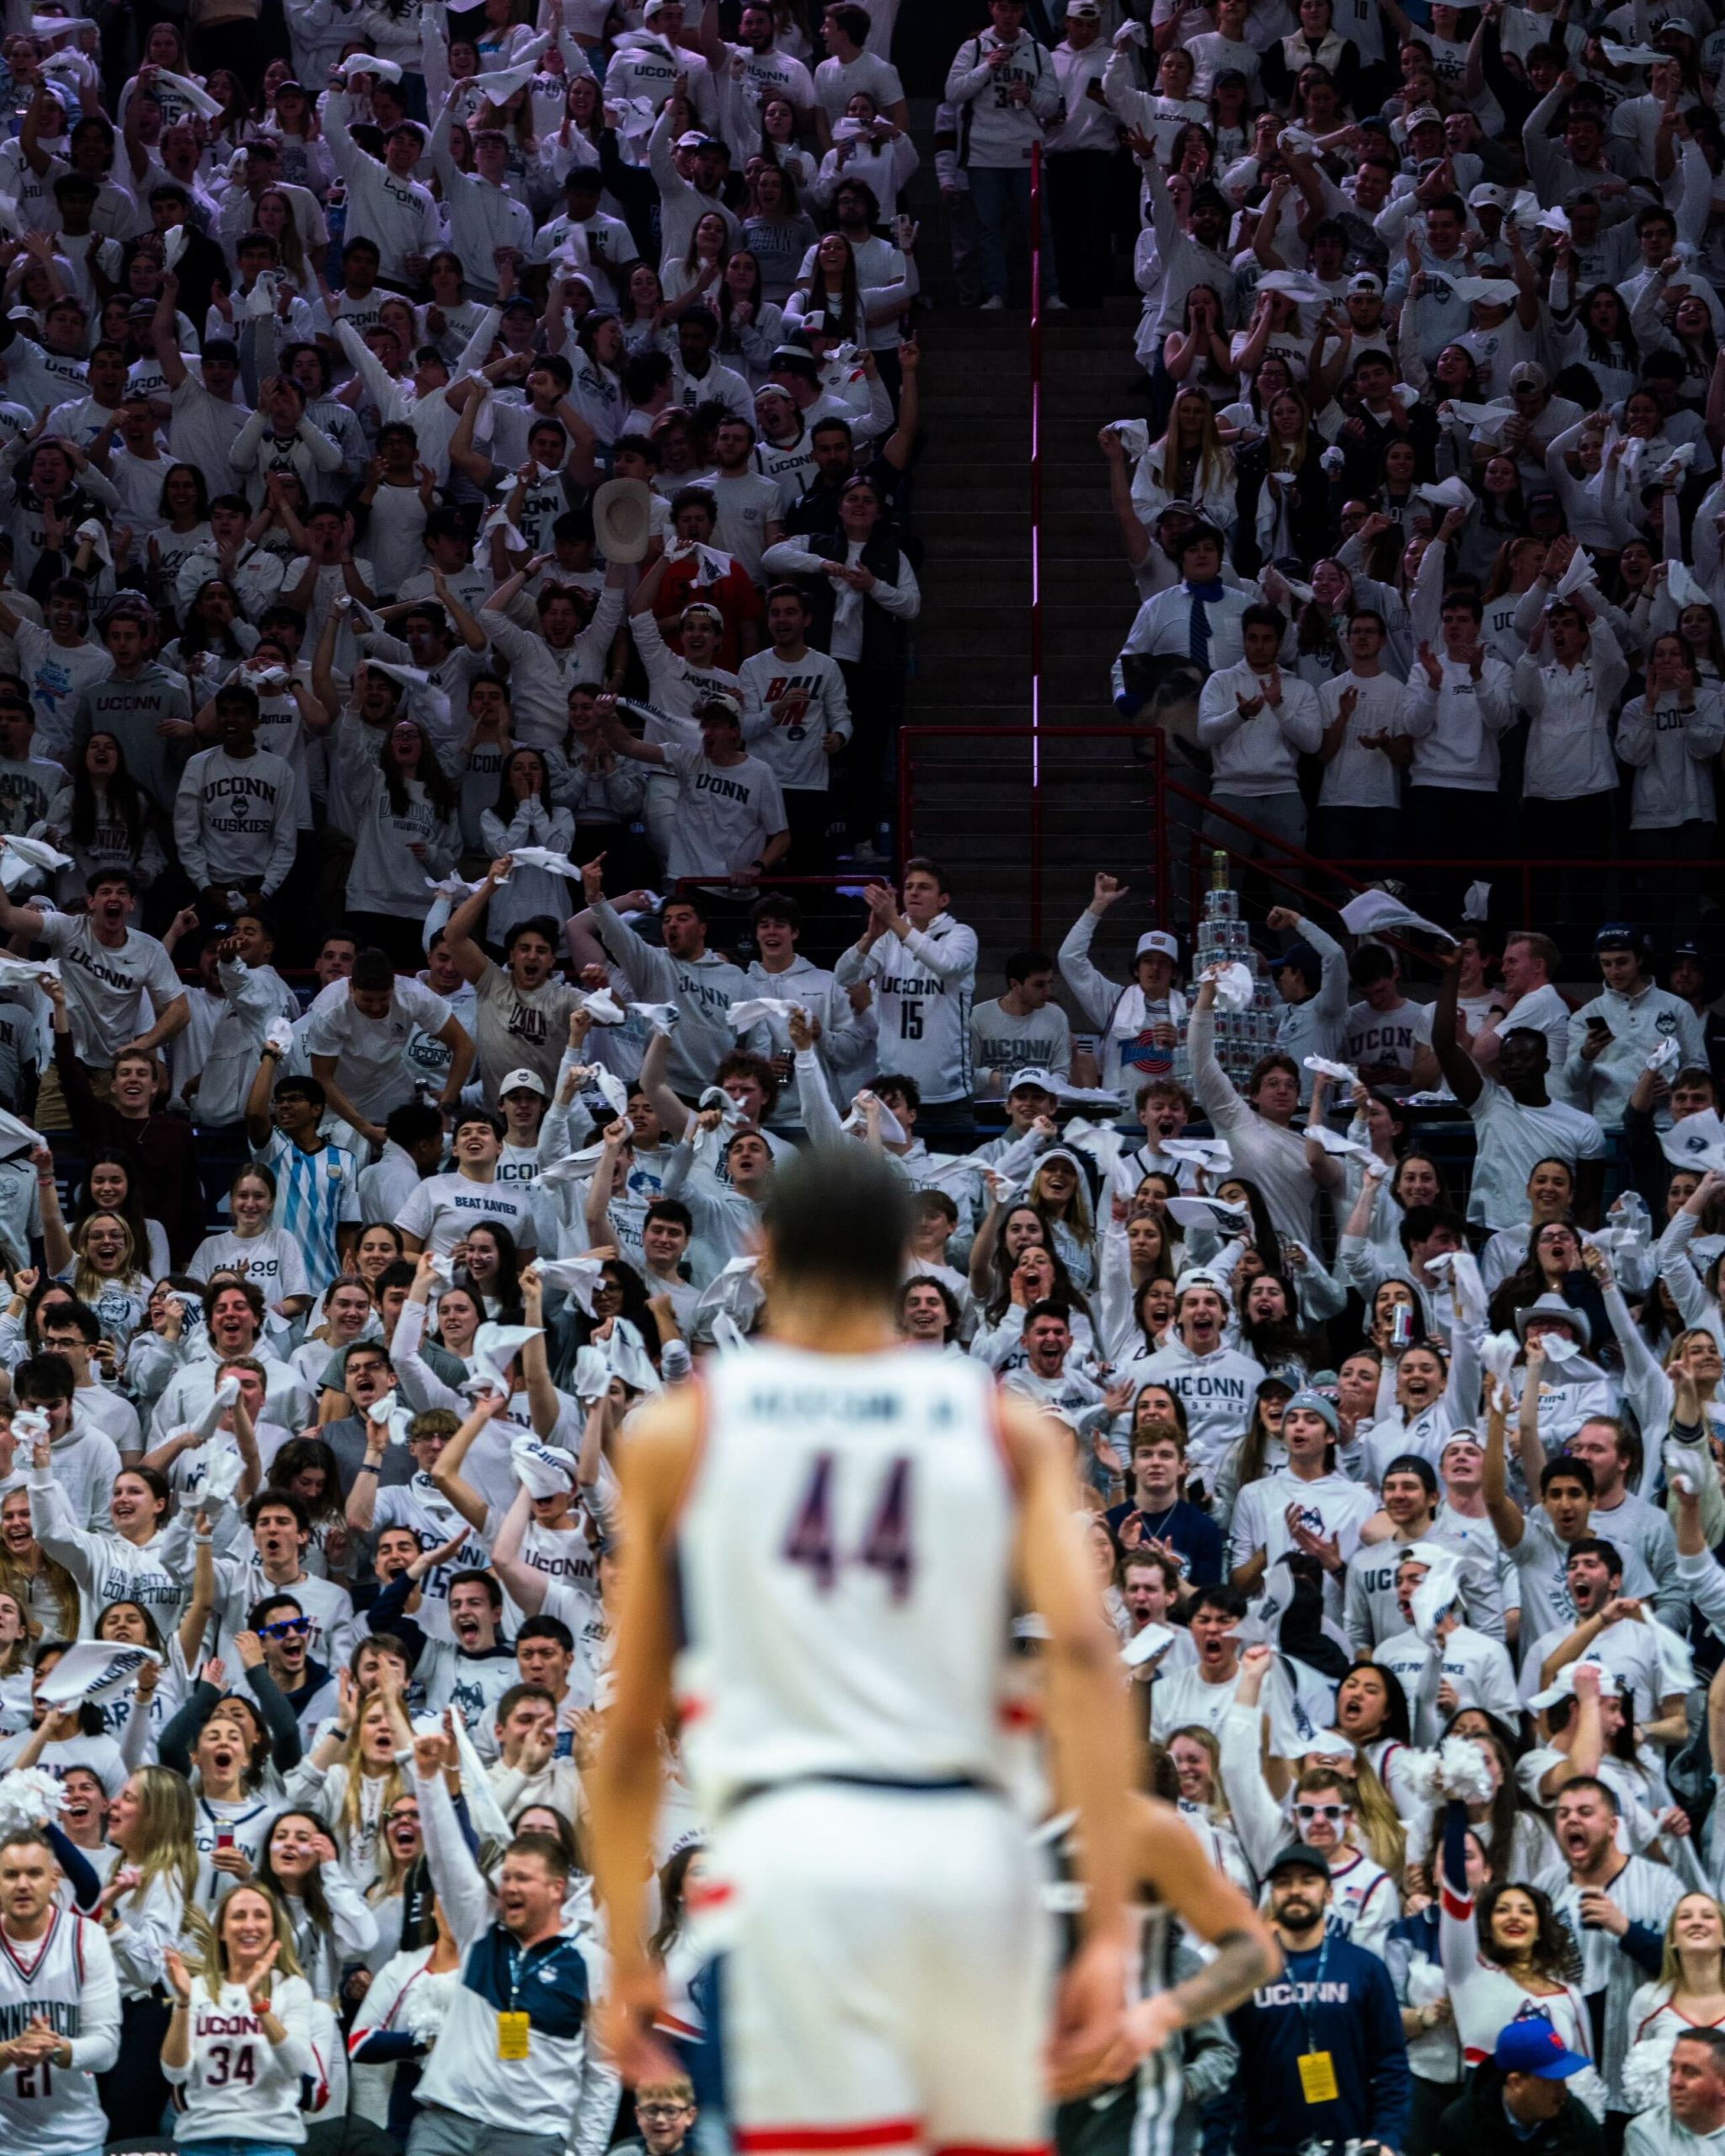 Andre Jackson faces a rowdy student section in Gampel Pavilion